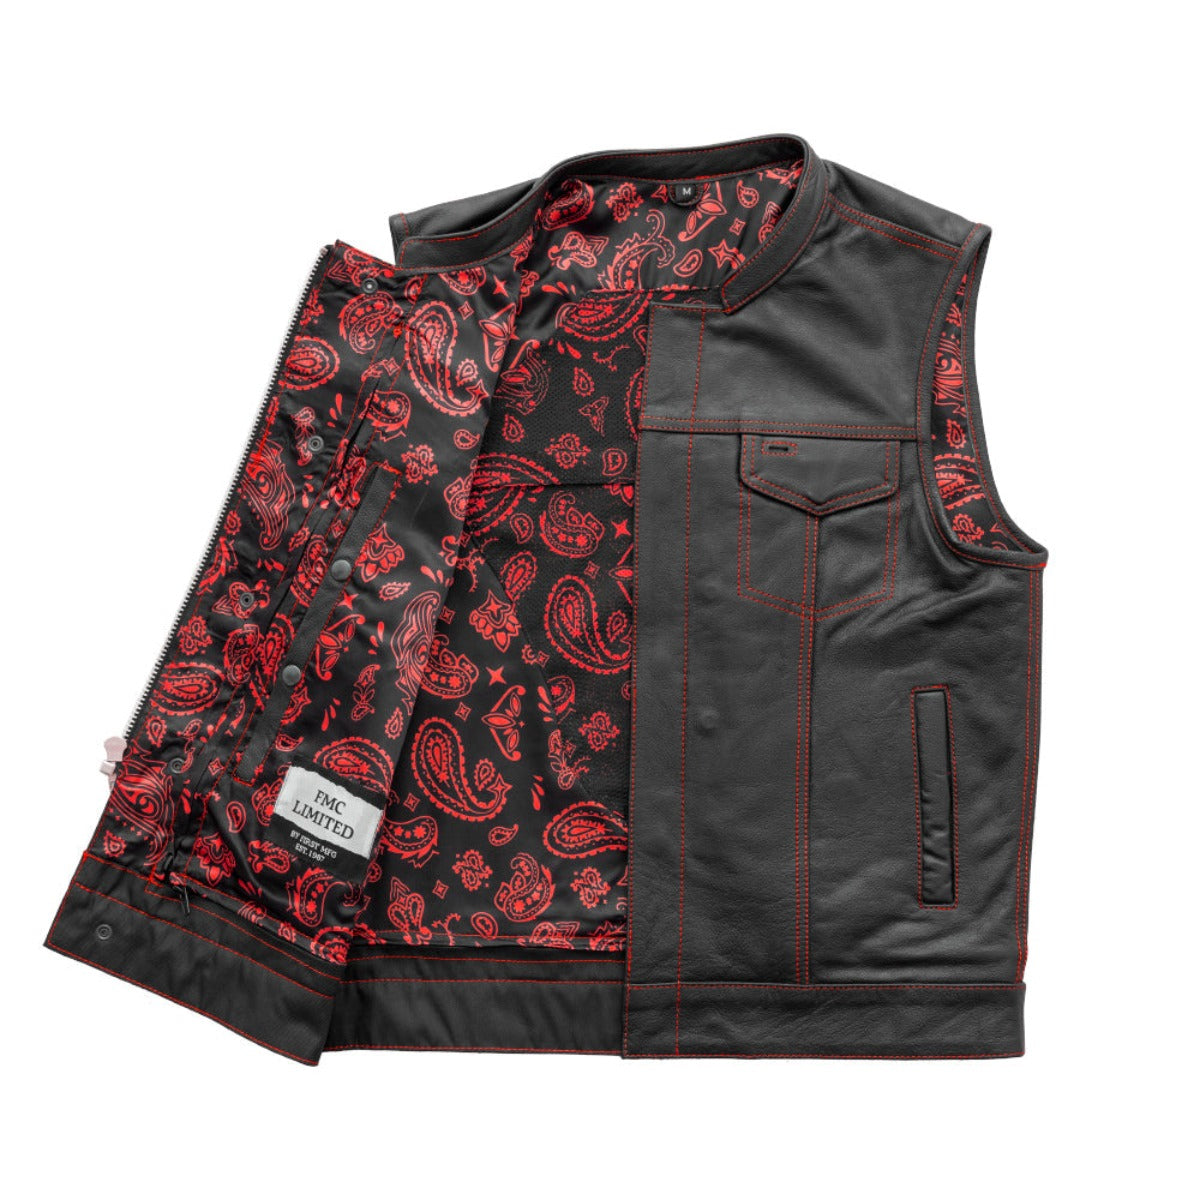 First Manufacturing Men's The Cut Motorcycle Leather Vest, Black/Red